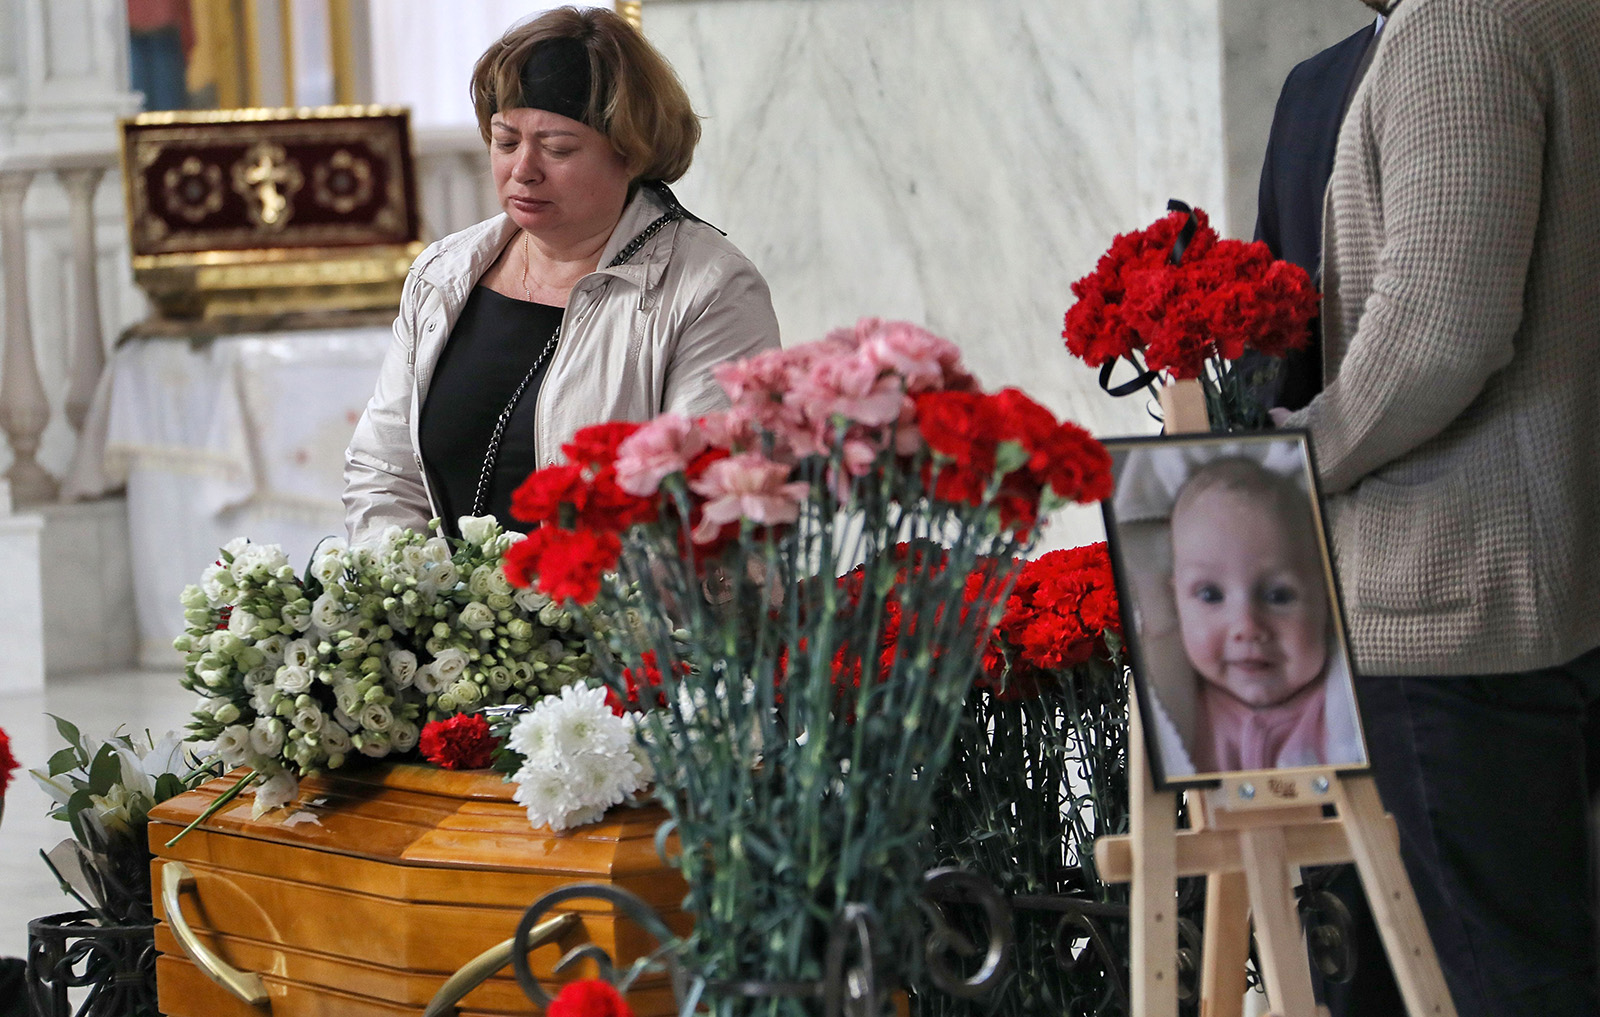 A funeral service for Valeriia Hlodan, her 3-month-old girl, Kira, and her mother, Liudmyla Yavkina, in Odesa, Ukraine, on April 27, following their deaths in a Russian missile strike.